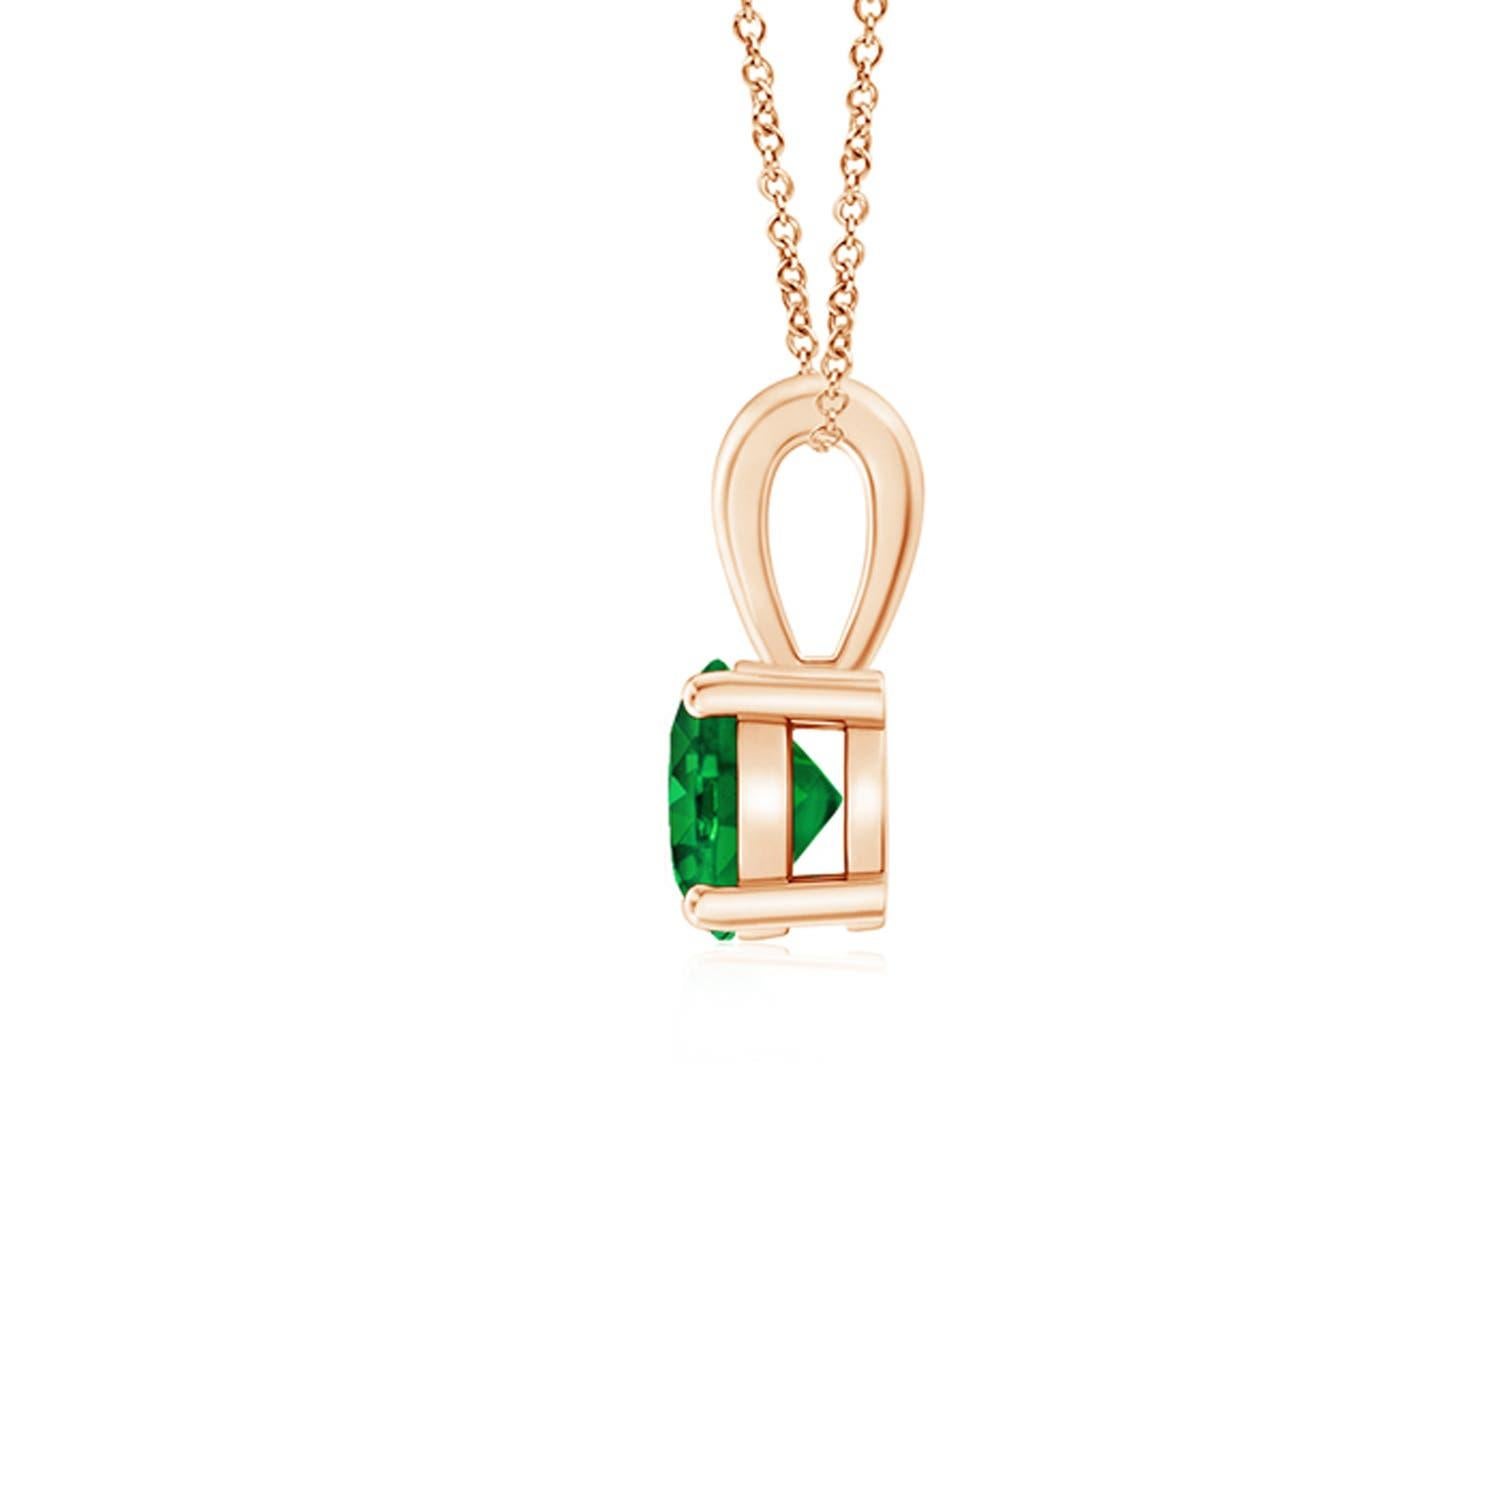 Linked to a lustrous bale is a lush green emerald solitaire secured in a four prong setting. Crafted in 14k rose gold, the elegant design of this classic emerald pendant draws all attention towards the magnificence of the center stone.
Emerald is